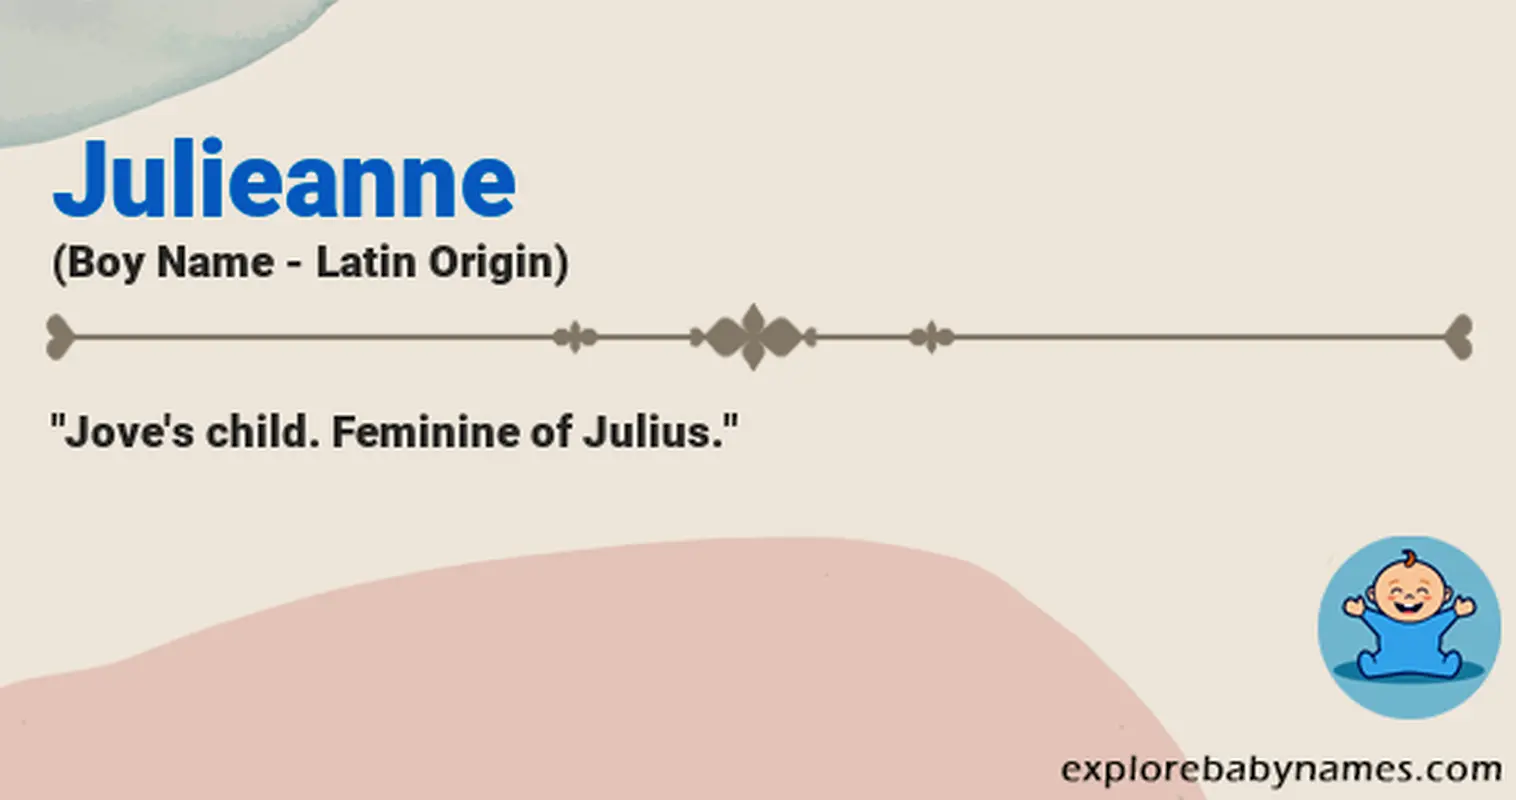 Meaning of Julieanne